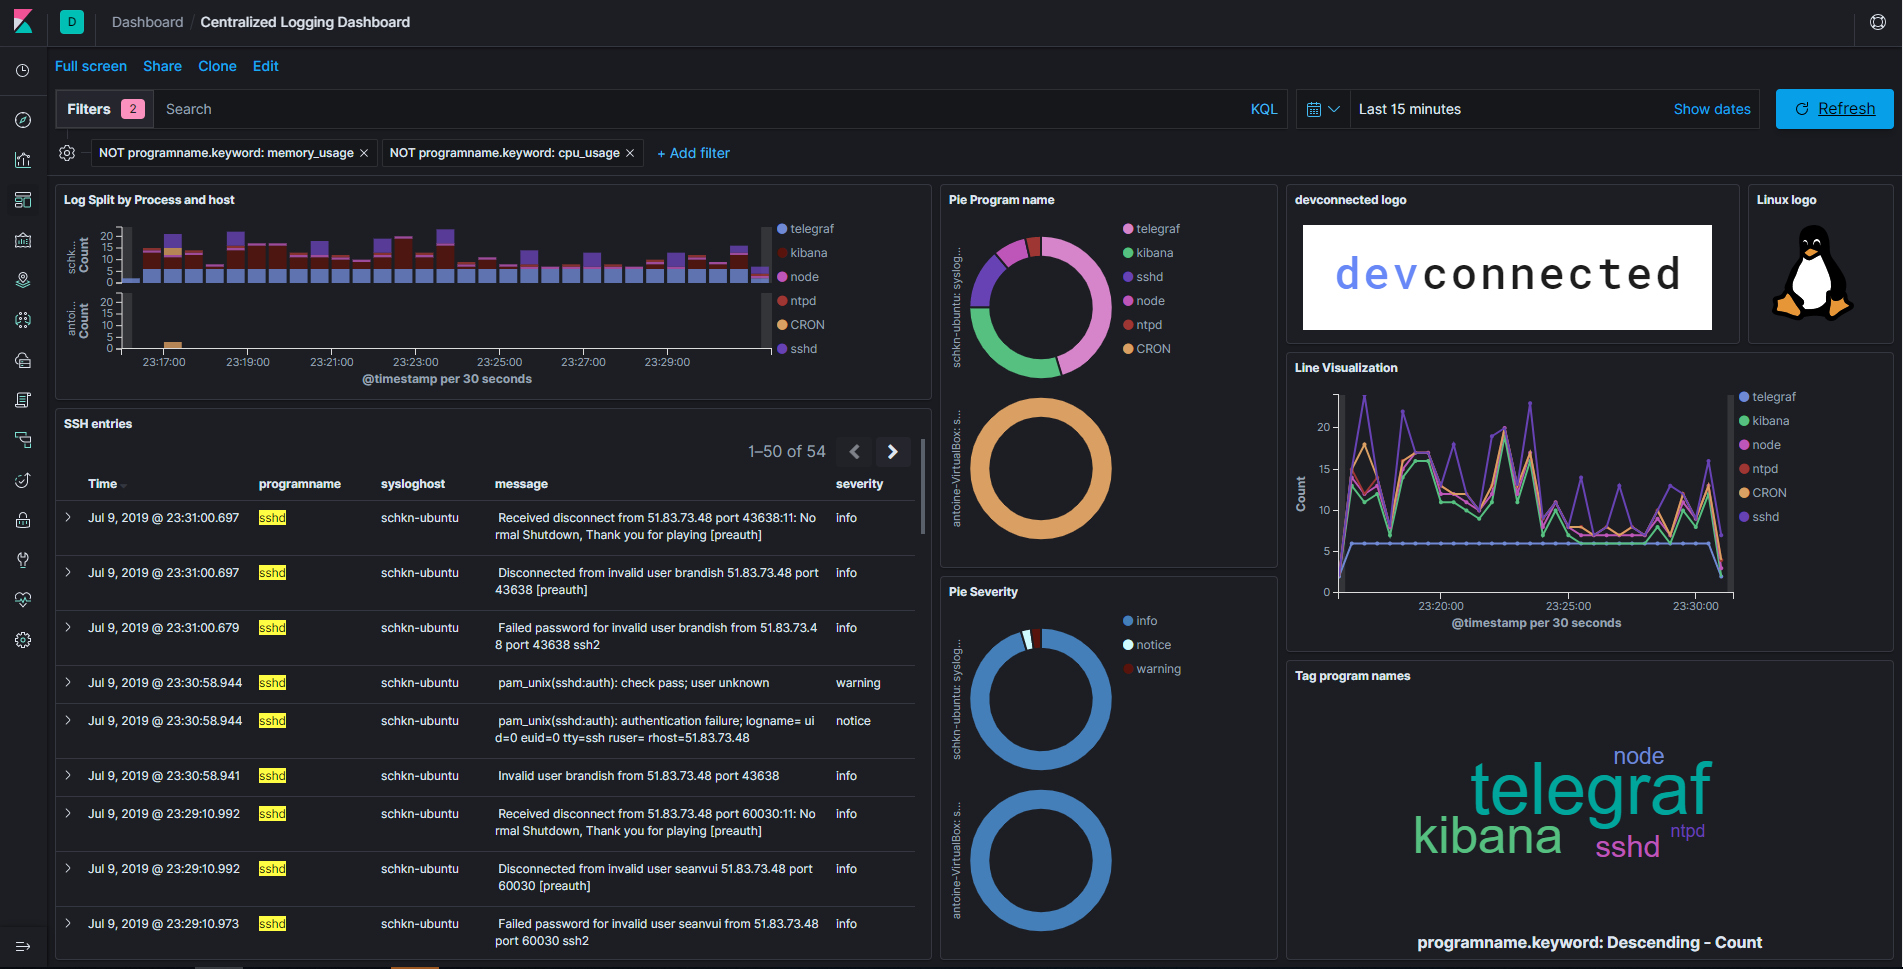 Monitoring Linux Logs with Kibana and Rsyslog